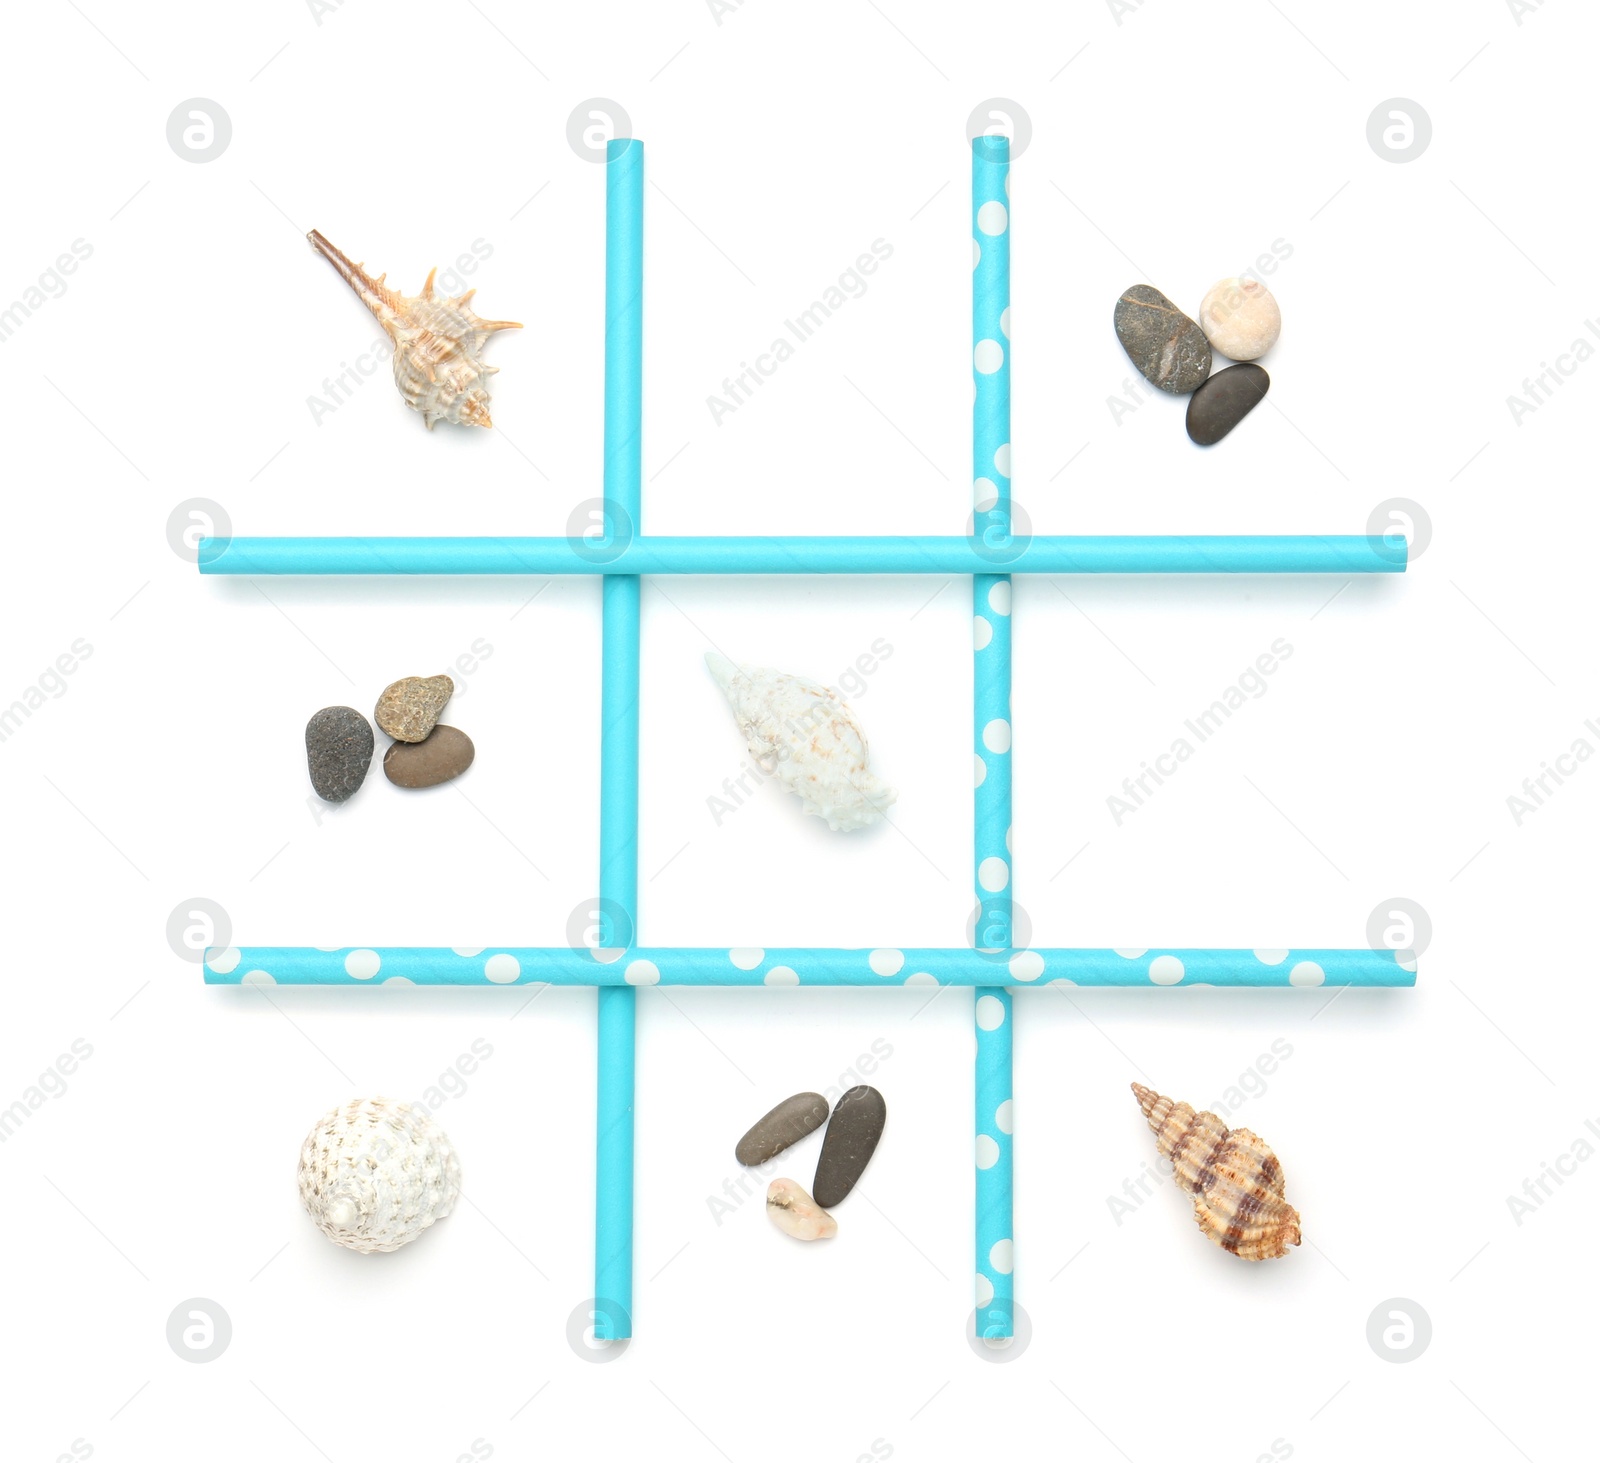 Photo of Tic tac toe game made with sea treasures isolated on white, top view